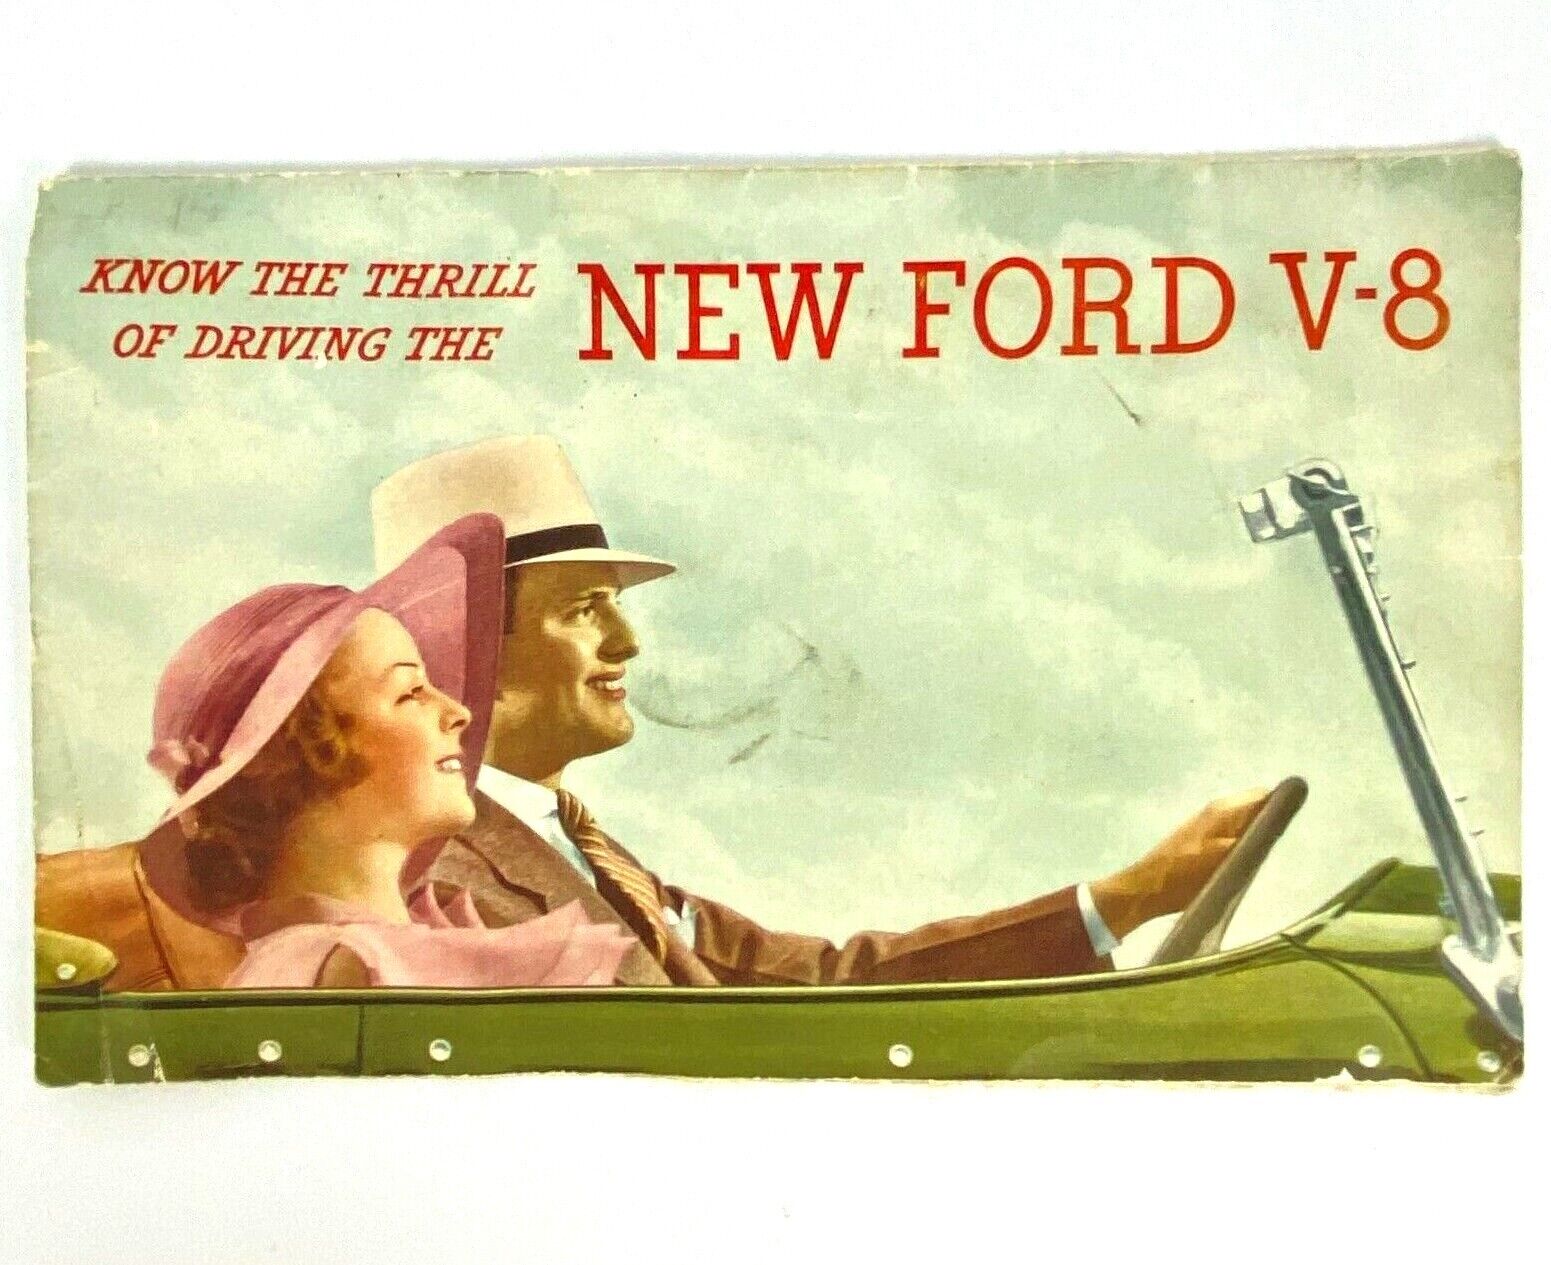 1934 New Ford Motor Company V-8 Advertising Fold Out Brochure Old Cars